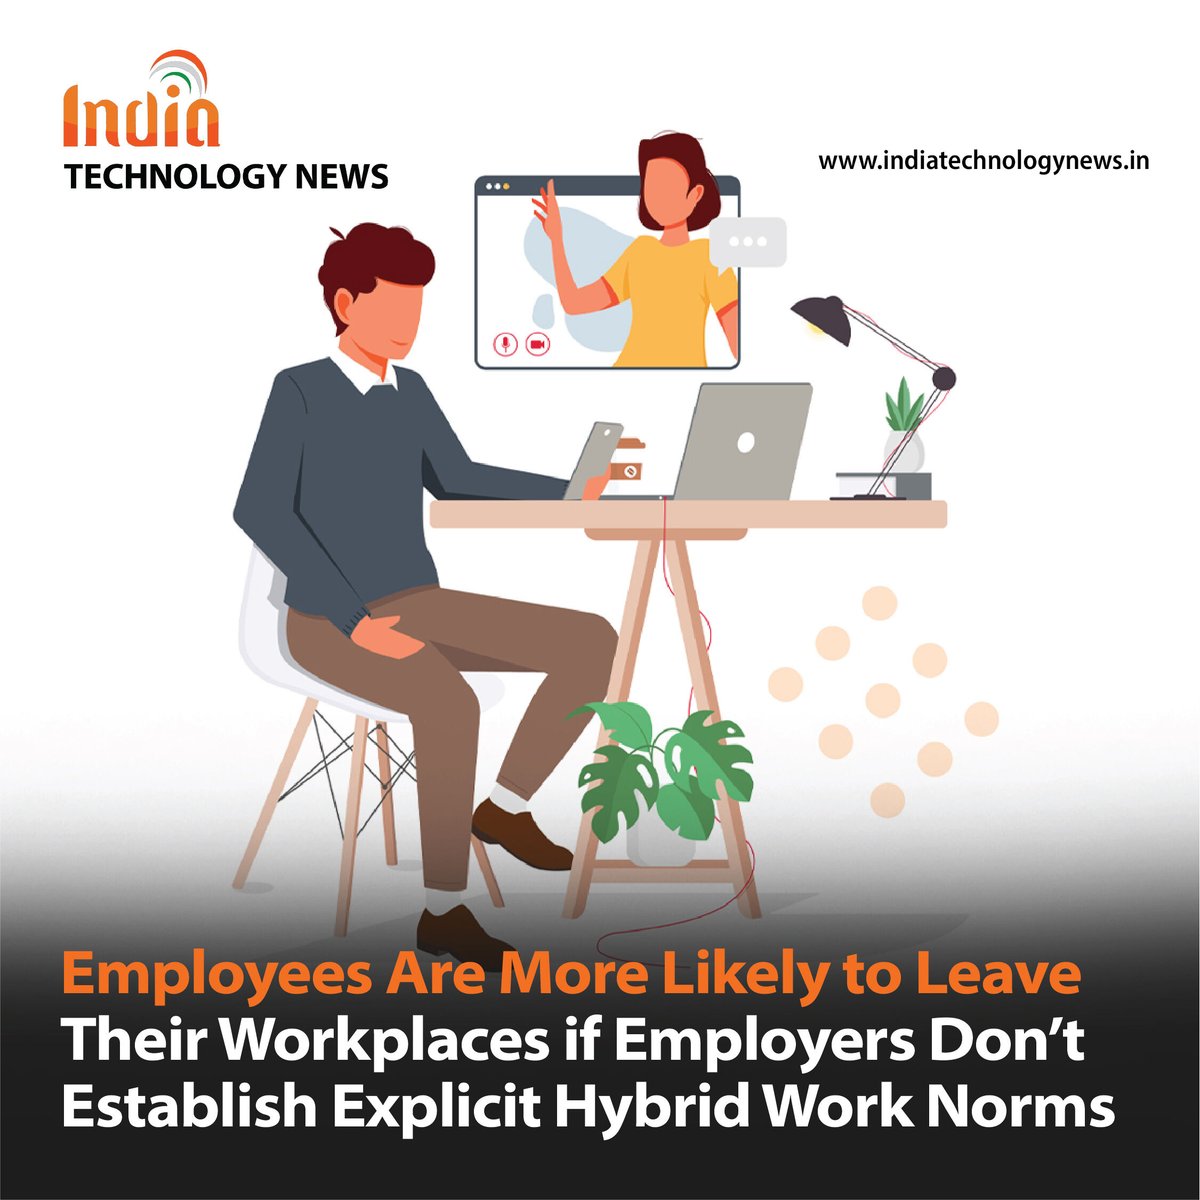 “Today’s hybrid work models lack the informal channels for absorbing norms that are present in an office setting,” said Caitlin Duffy, director in the #Gartner #HR practice.

Read more: bit.ly/3Lq7j0T

#IndiaTechnologyNews #HybridWork #Employee